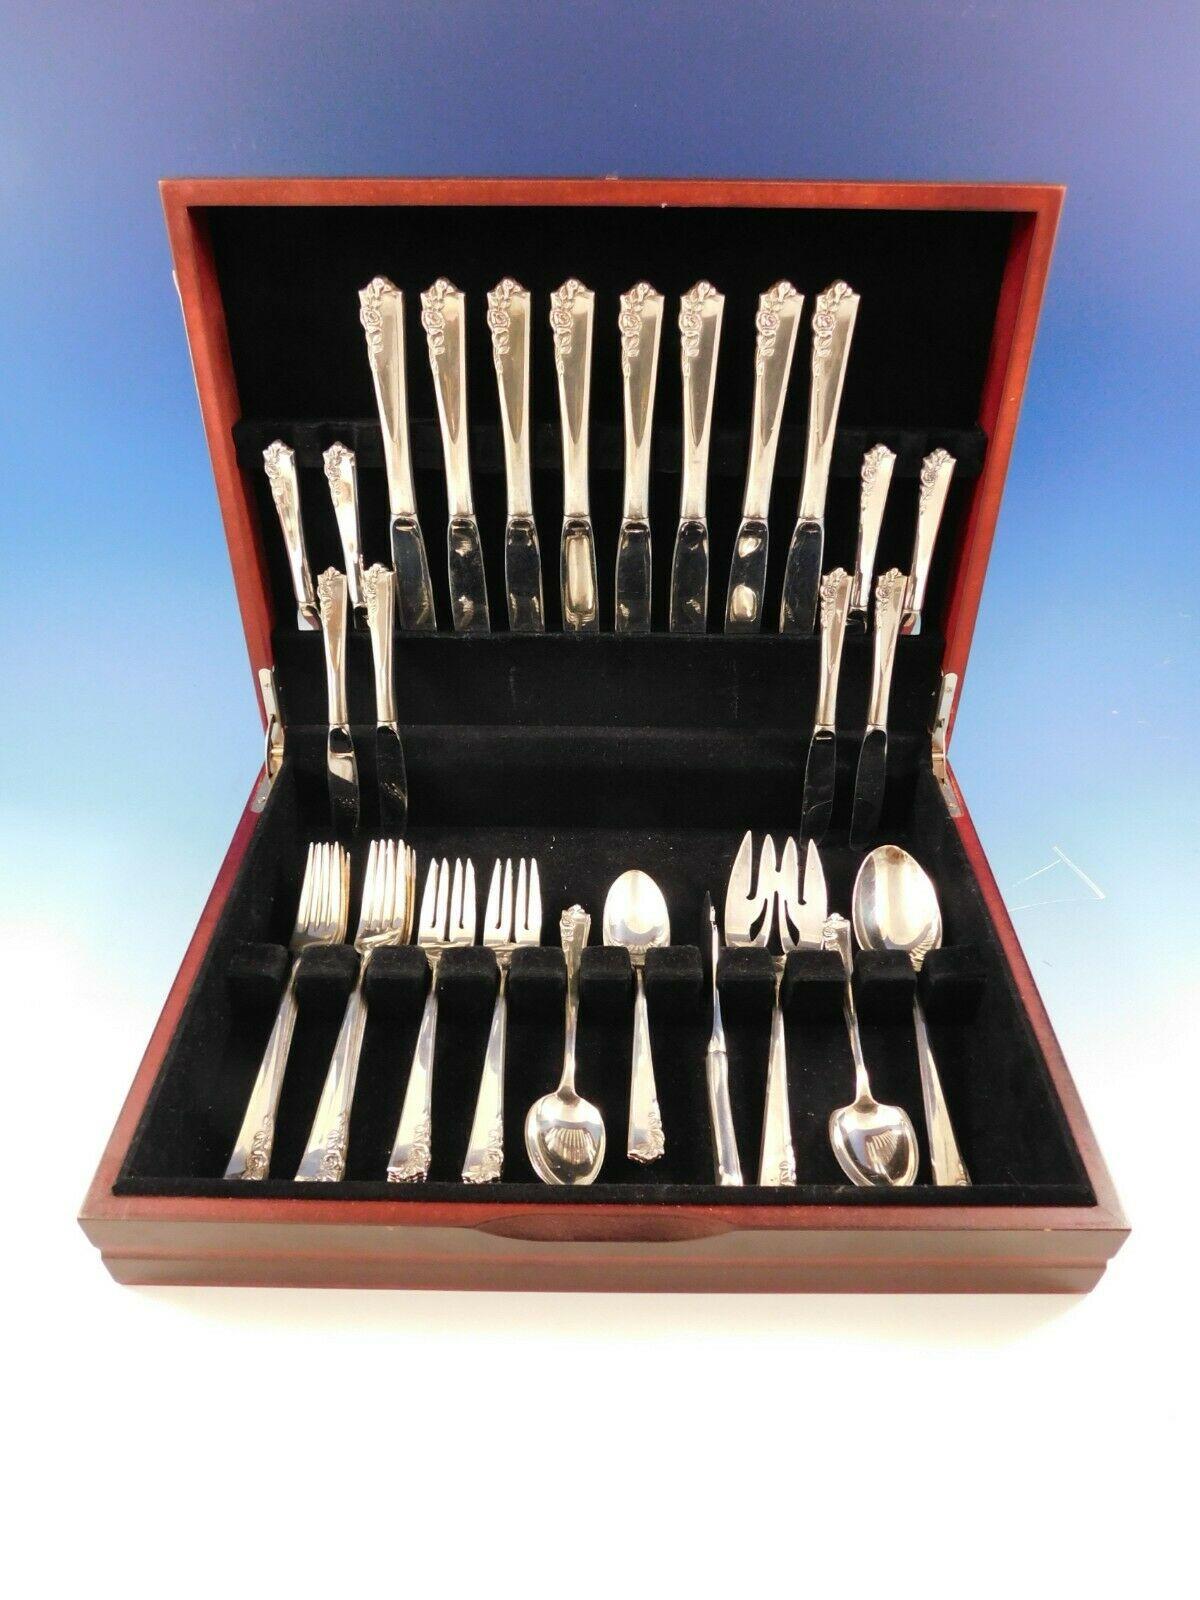 Scarce Garnet rose by Lunt sterling silver flatware set - 44 pieces. This set includes:

8 knives, 9